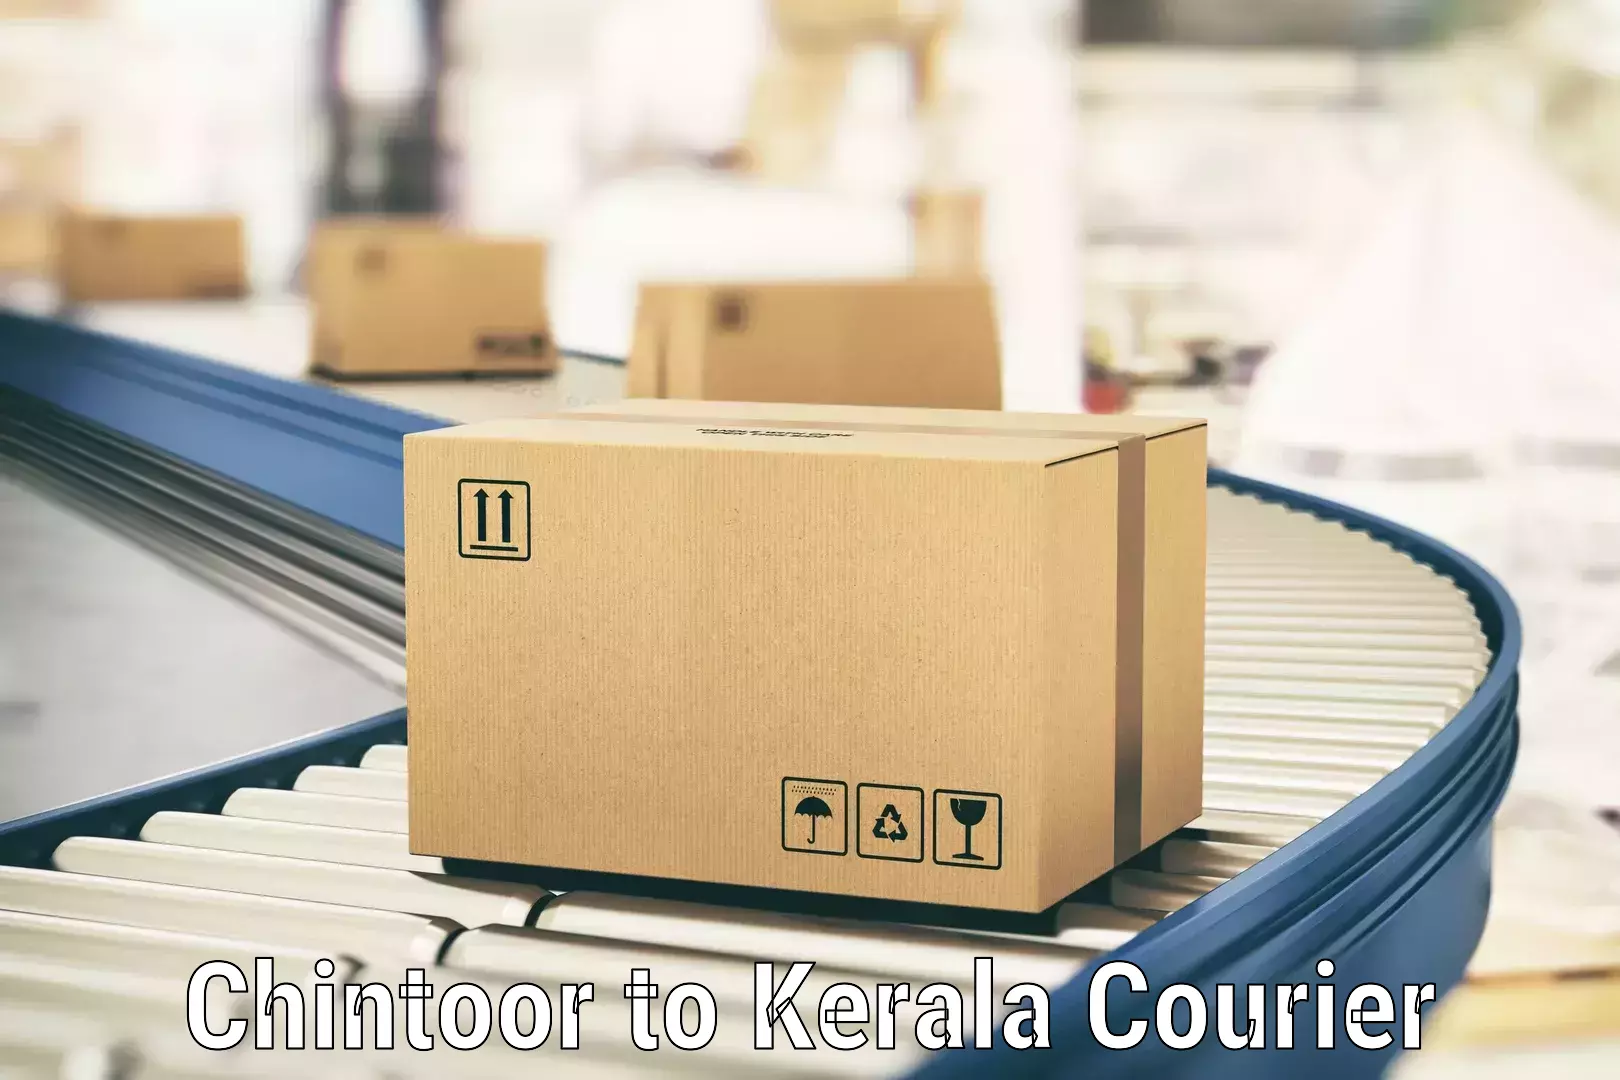 Rapid shipping services Chintoor to Calicut